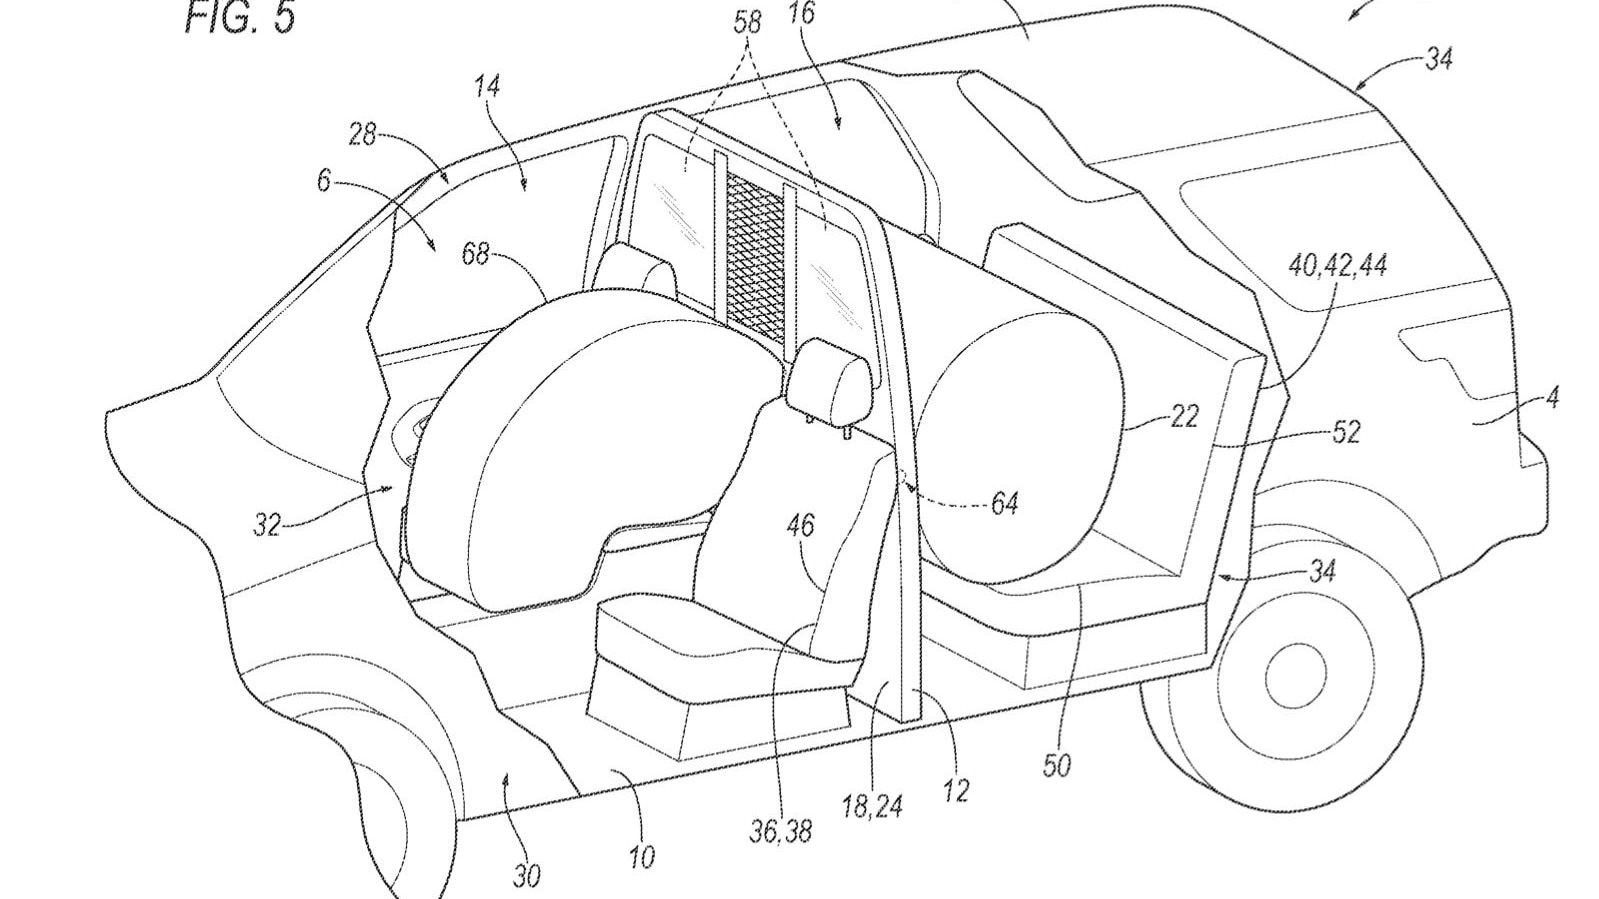 Ford police car airbag patent image